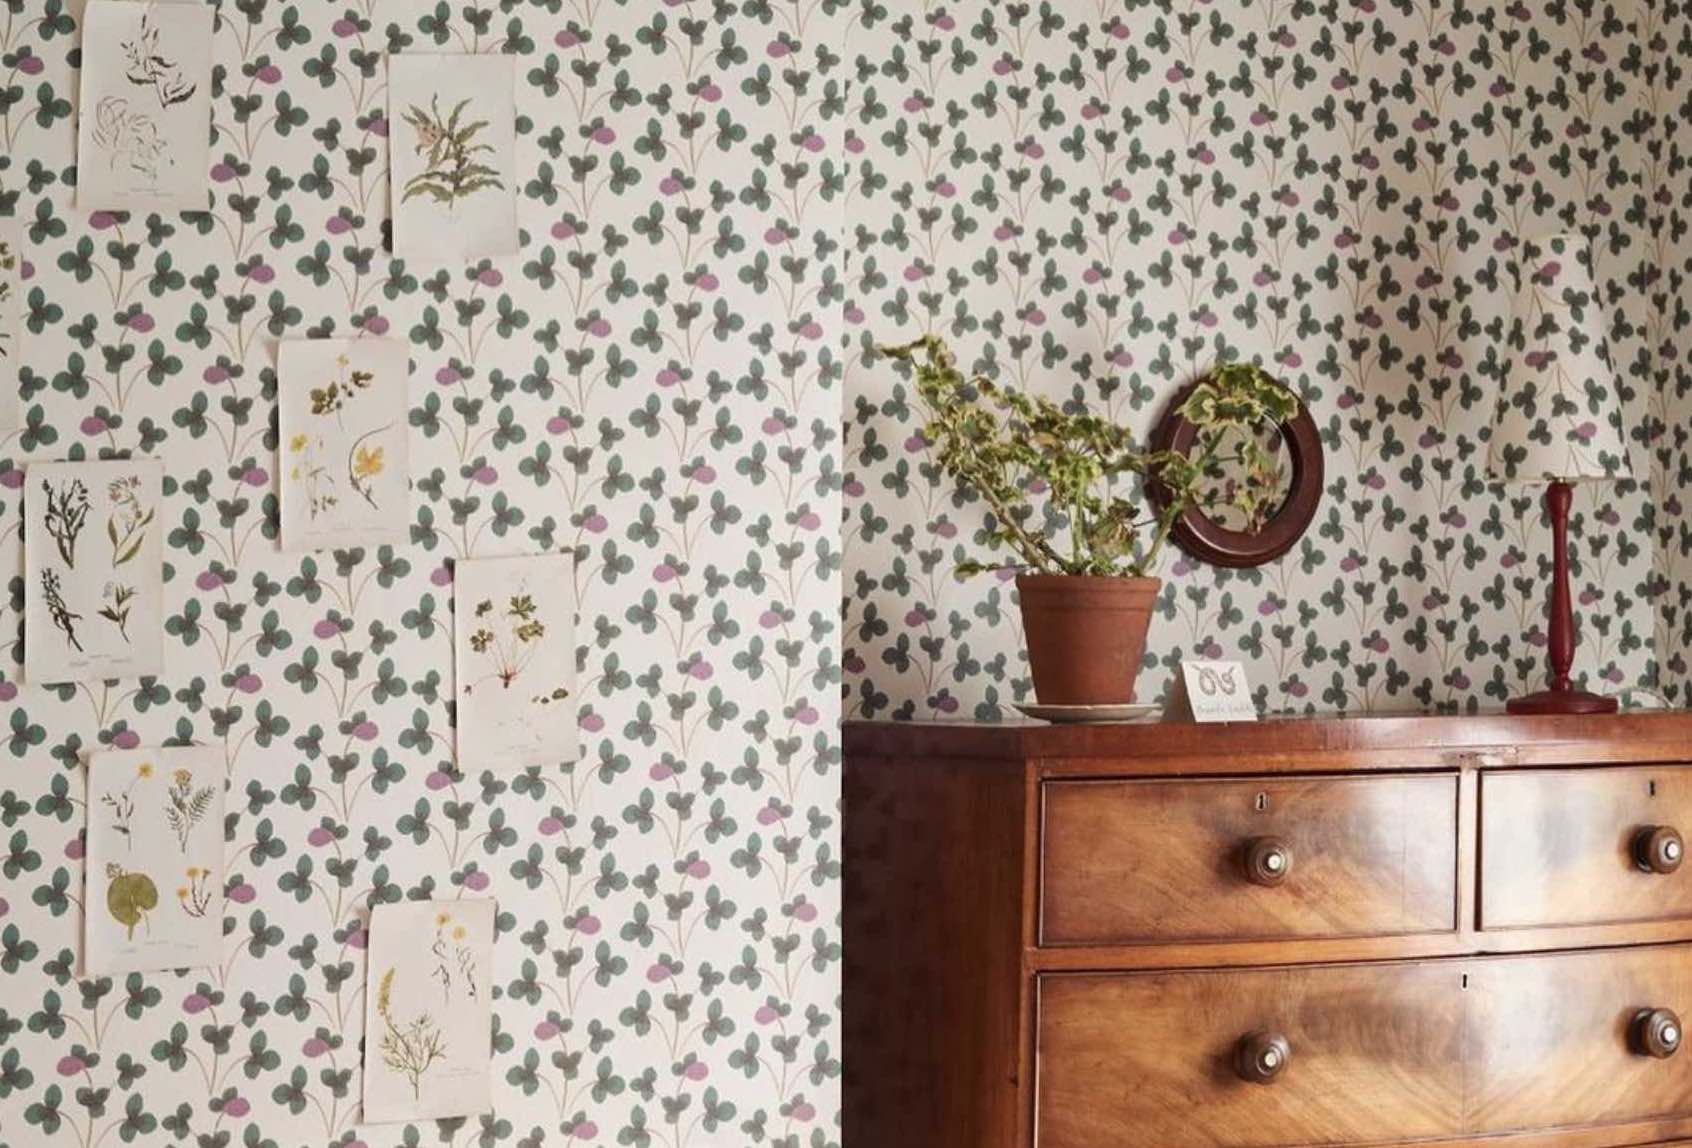 17 of My Favorite Wallpaper Patterns and What I Love About Each One